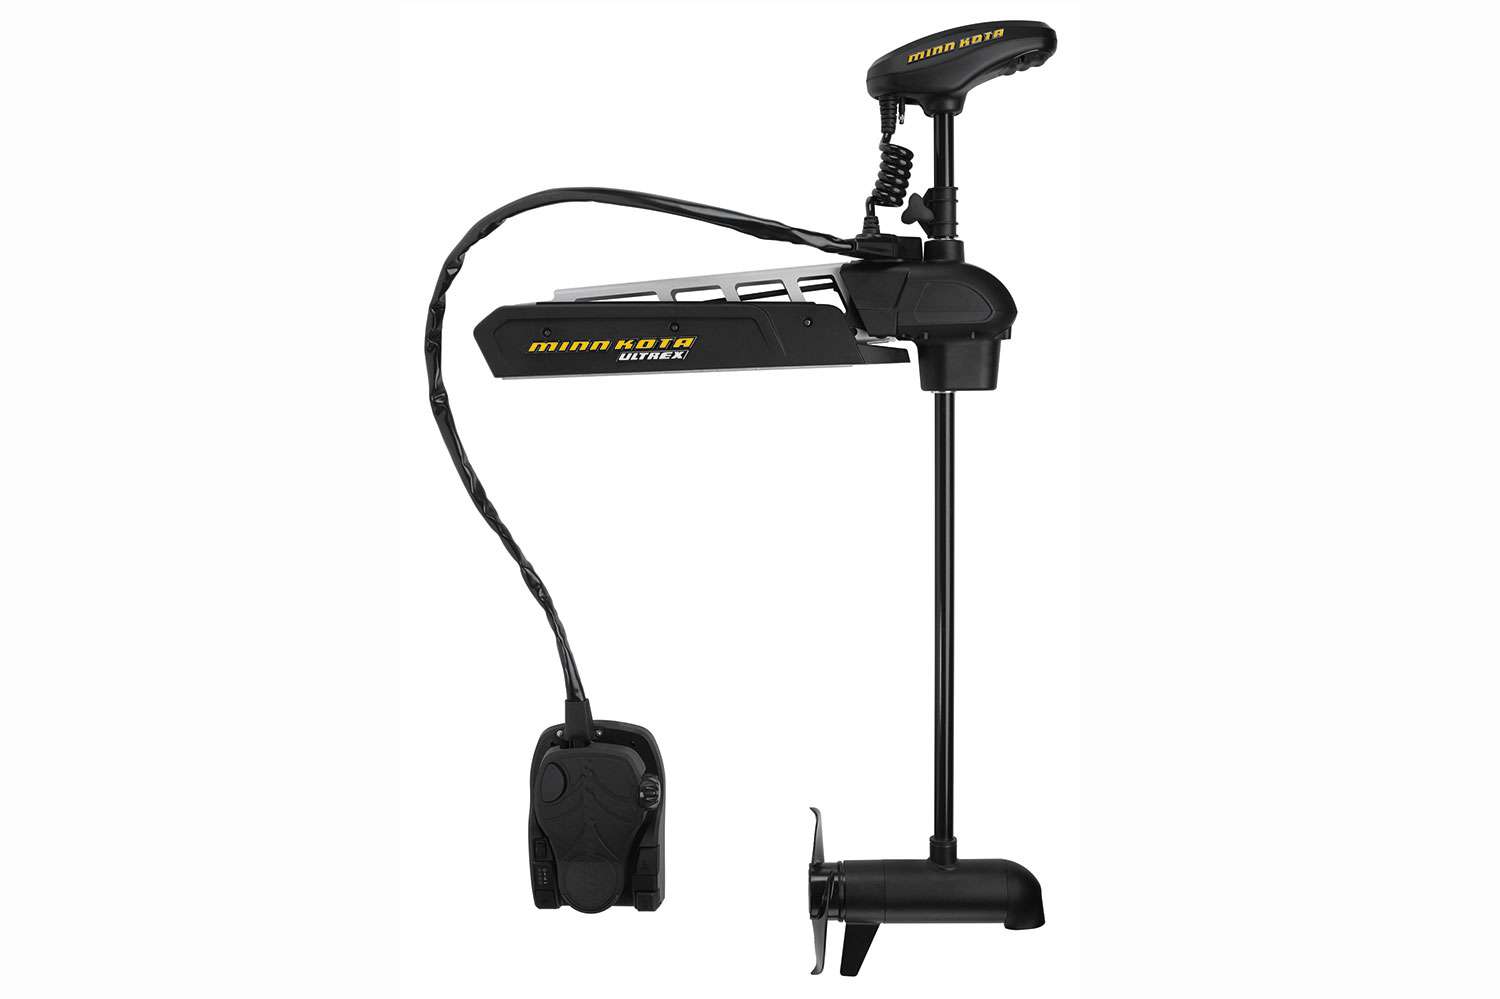 <p><b>Ultrex with Built-In MEGA Side Imaging</b></p>
The Ultrex trolling motor from Minn Kota revolutionized boat control by combining Spot-Lock and other boat control technologies like Jog and Follow the Contour with power steering in an intuitive and responsive heel-toe foot pedal. Now, in the newest evolution of the proprietary One-Boat Network, Minn Kota has incorporated Humminbirdâs MEGA Side Imaging into the Ultrex, resulting in the clearest, sharpest real-time images from the bow of the boat. With Built-In MEGA Side Imaging, imaging technology with performance thatâs nearly three times greater than traditional 455 kHz frequencies, the transducer is housed in the motorâs lower unit and the wiring runs through the indestructible composite shaft providing clean rigging that is protected from damage over time. In addition, having the transducer integrated into the trolling motors allows anglers to see what is directly below the bow and to the side of the boat, rather than the transom, meaning anglers can make better informed decisions in real time.<br>
<p><b>MSRP: $2,999.99</b></p>
<a href=